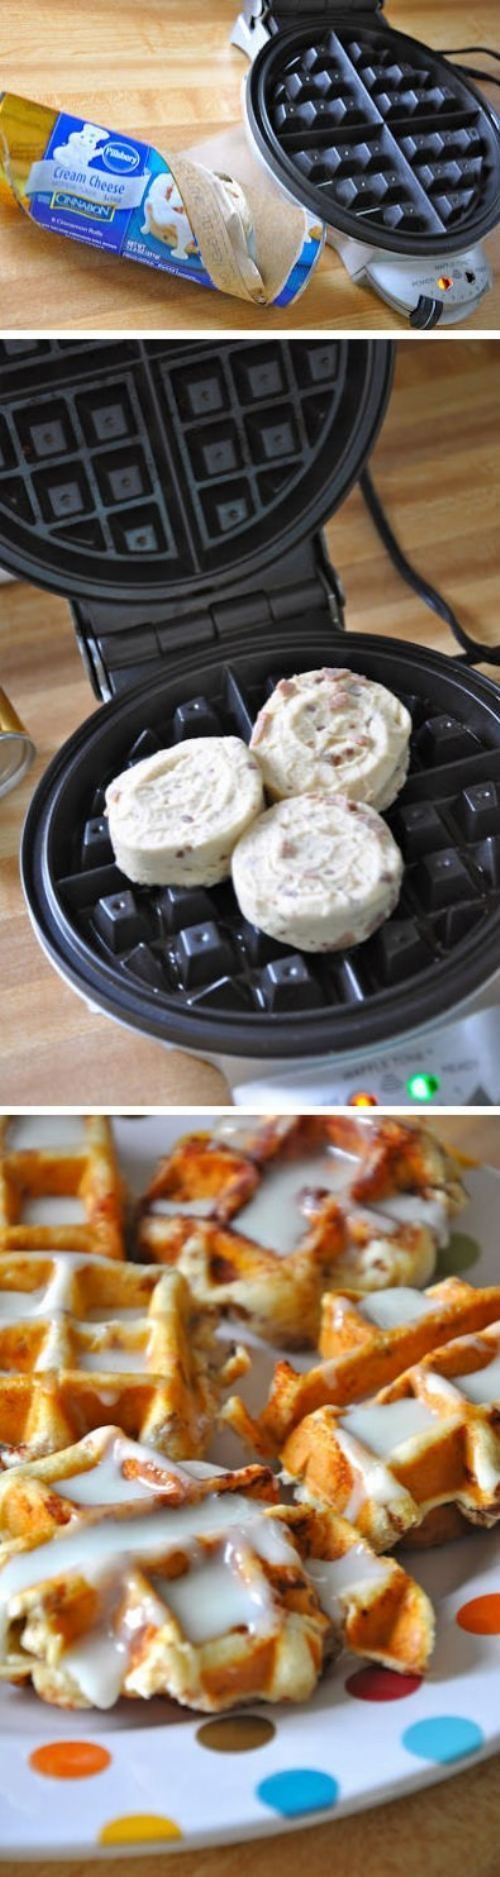 Cinnamon Roll Waffles for Christmas Morning!  ***OMG  My grandson will love these!!!